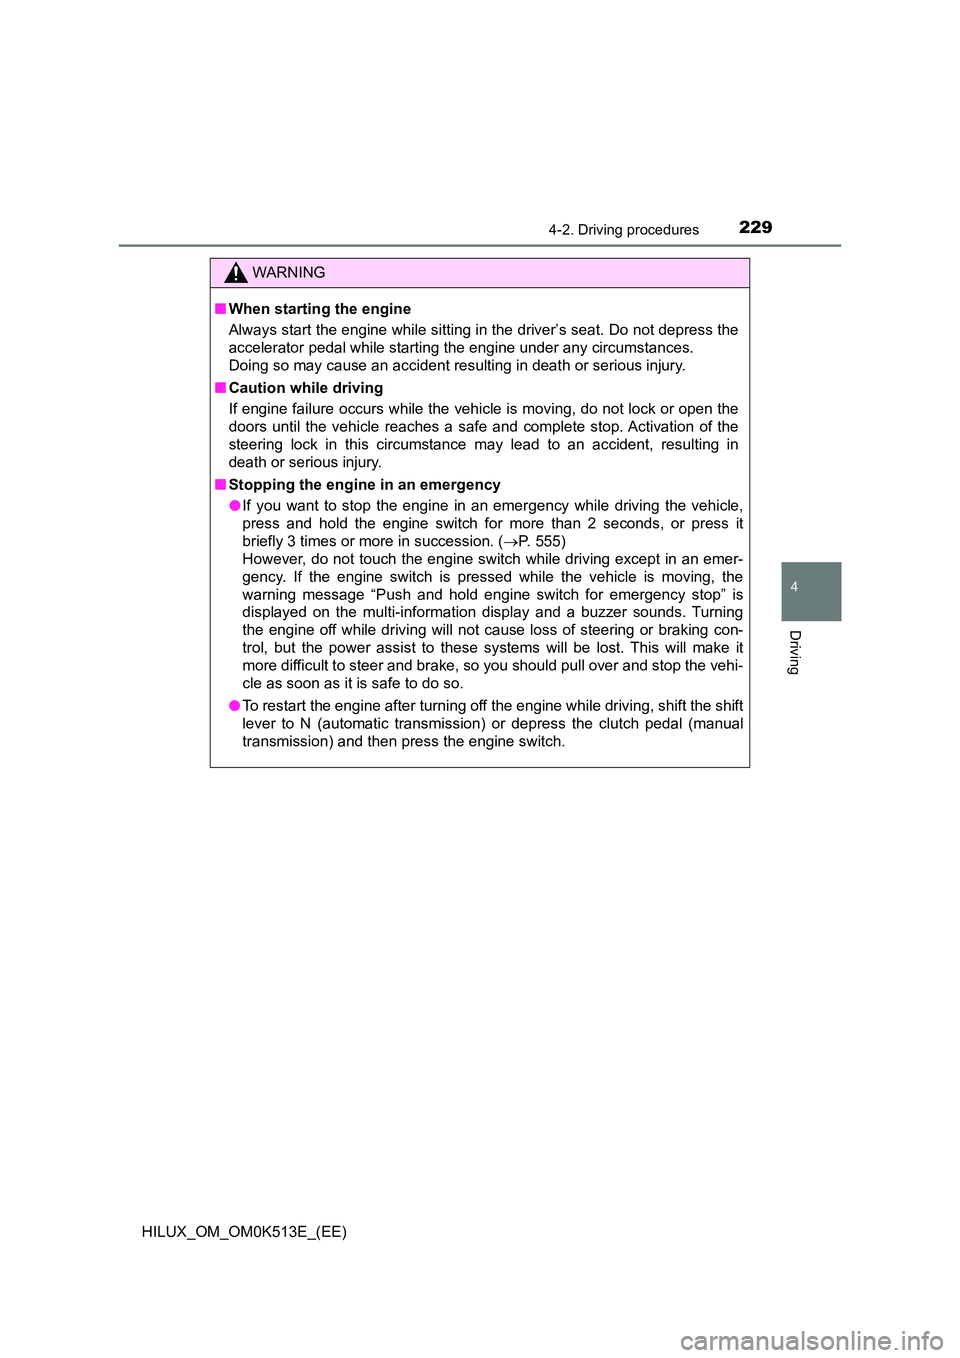 TOYOTA HILUX 2021  Owners Manual (in English) 2294-2. Driving procedures
4
Driving
HILUX_OM_OM0K513E_(EE)
WARNING
�QWhen starting the engine 
Always start the engine while sitting in the driver’s seat. Do not depress the 
accelerator pedal whil